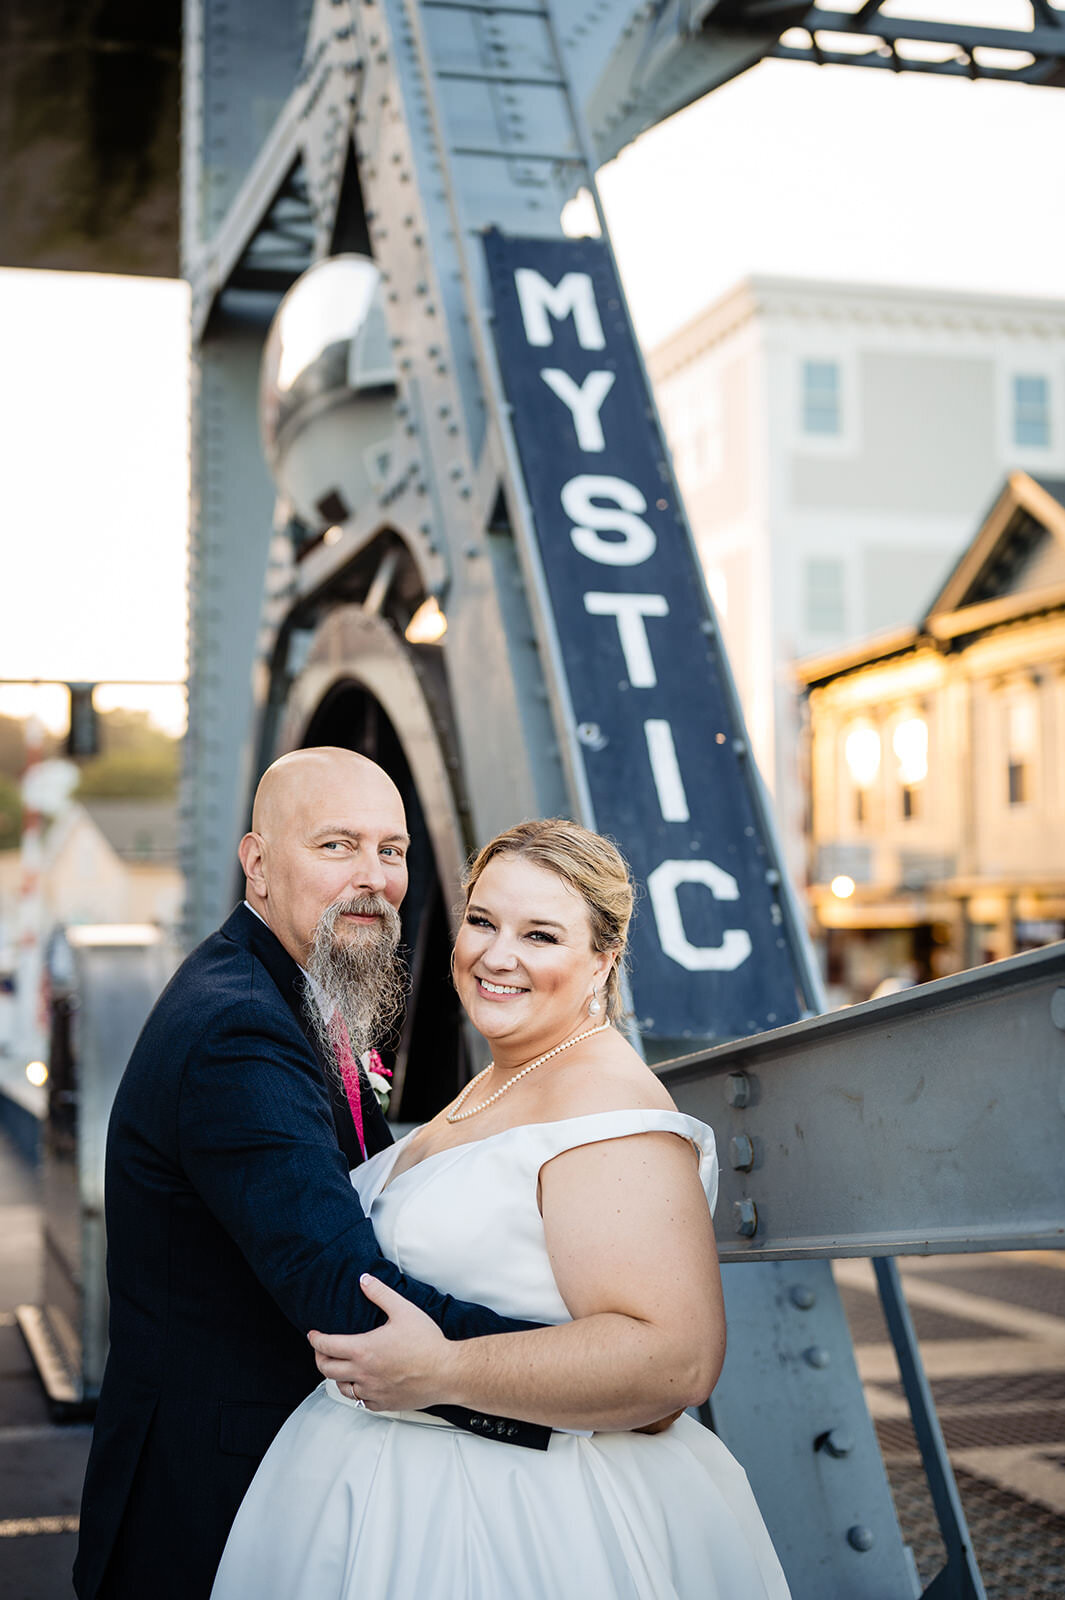 A smiling bride and groom stand close together in front of the iconic Mystic drawbridge, with the name "Mystic" clearly visible